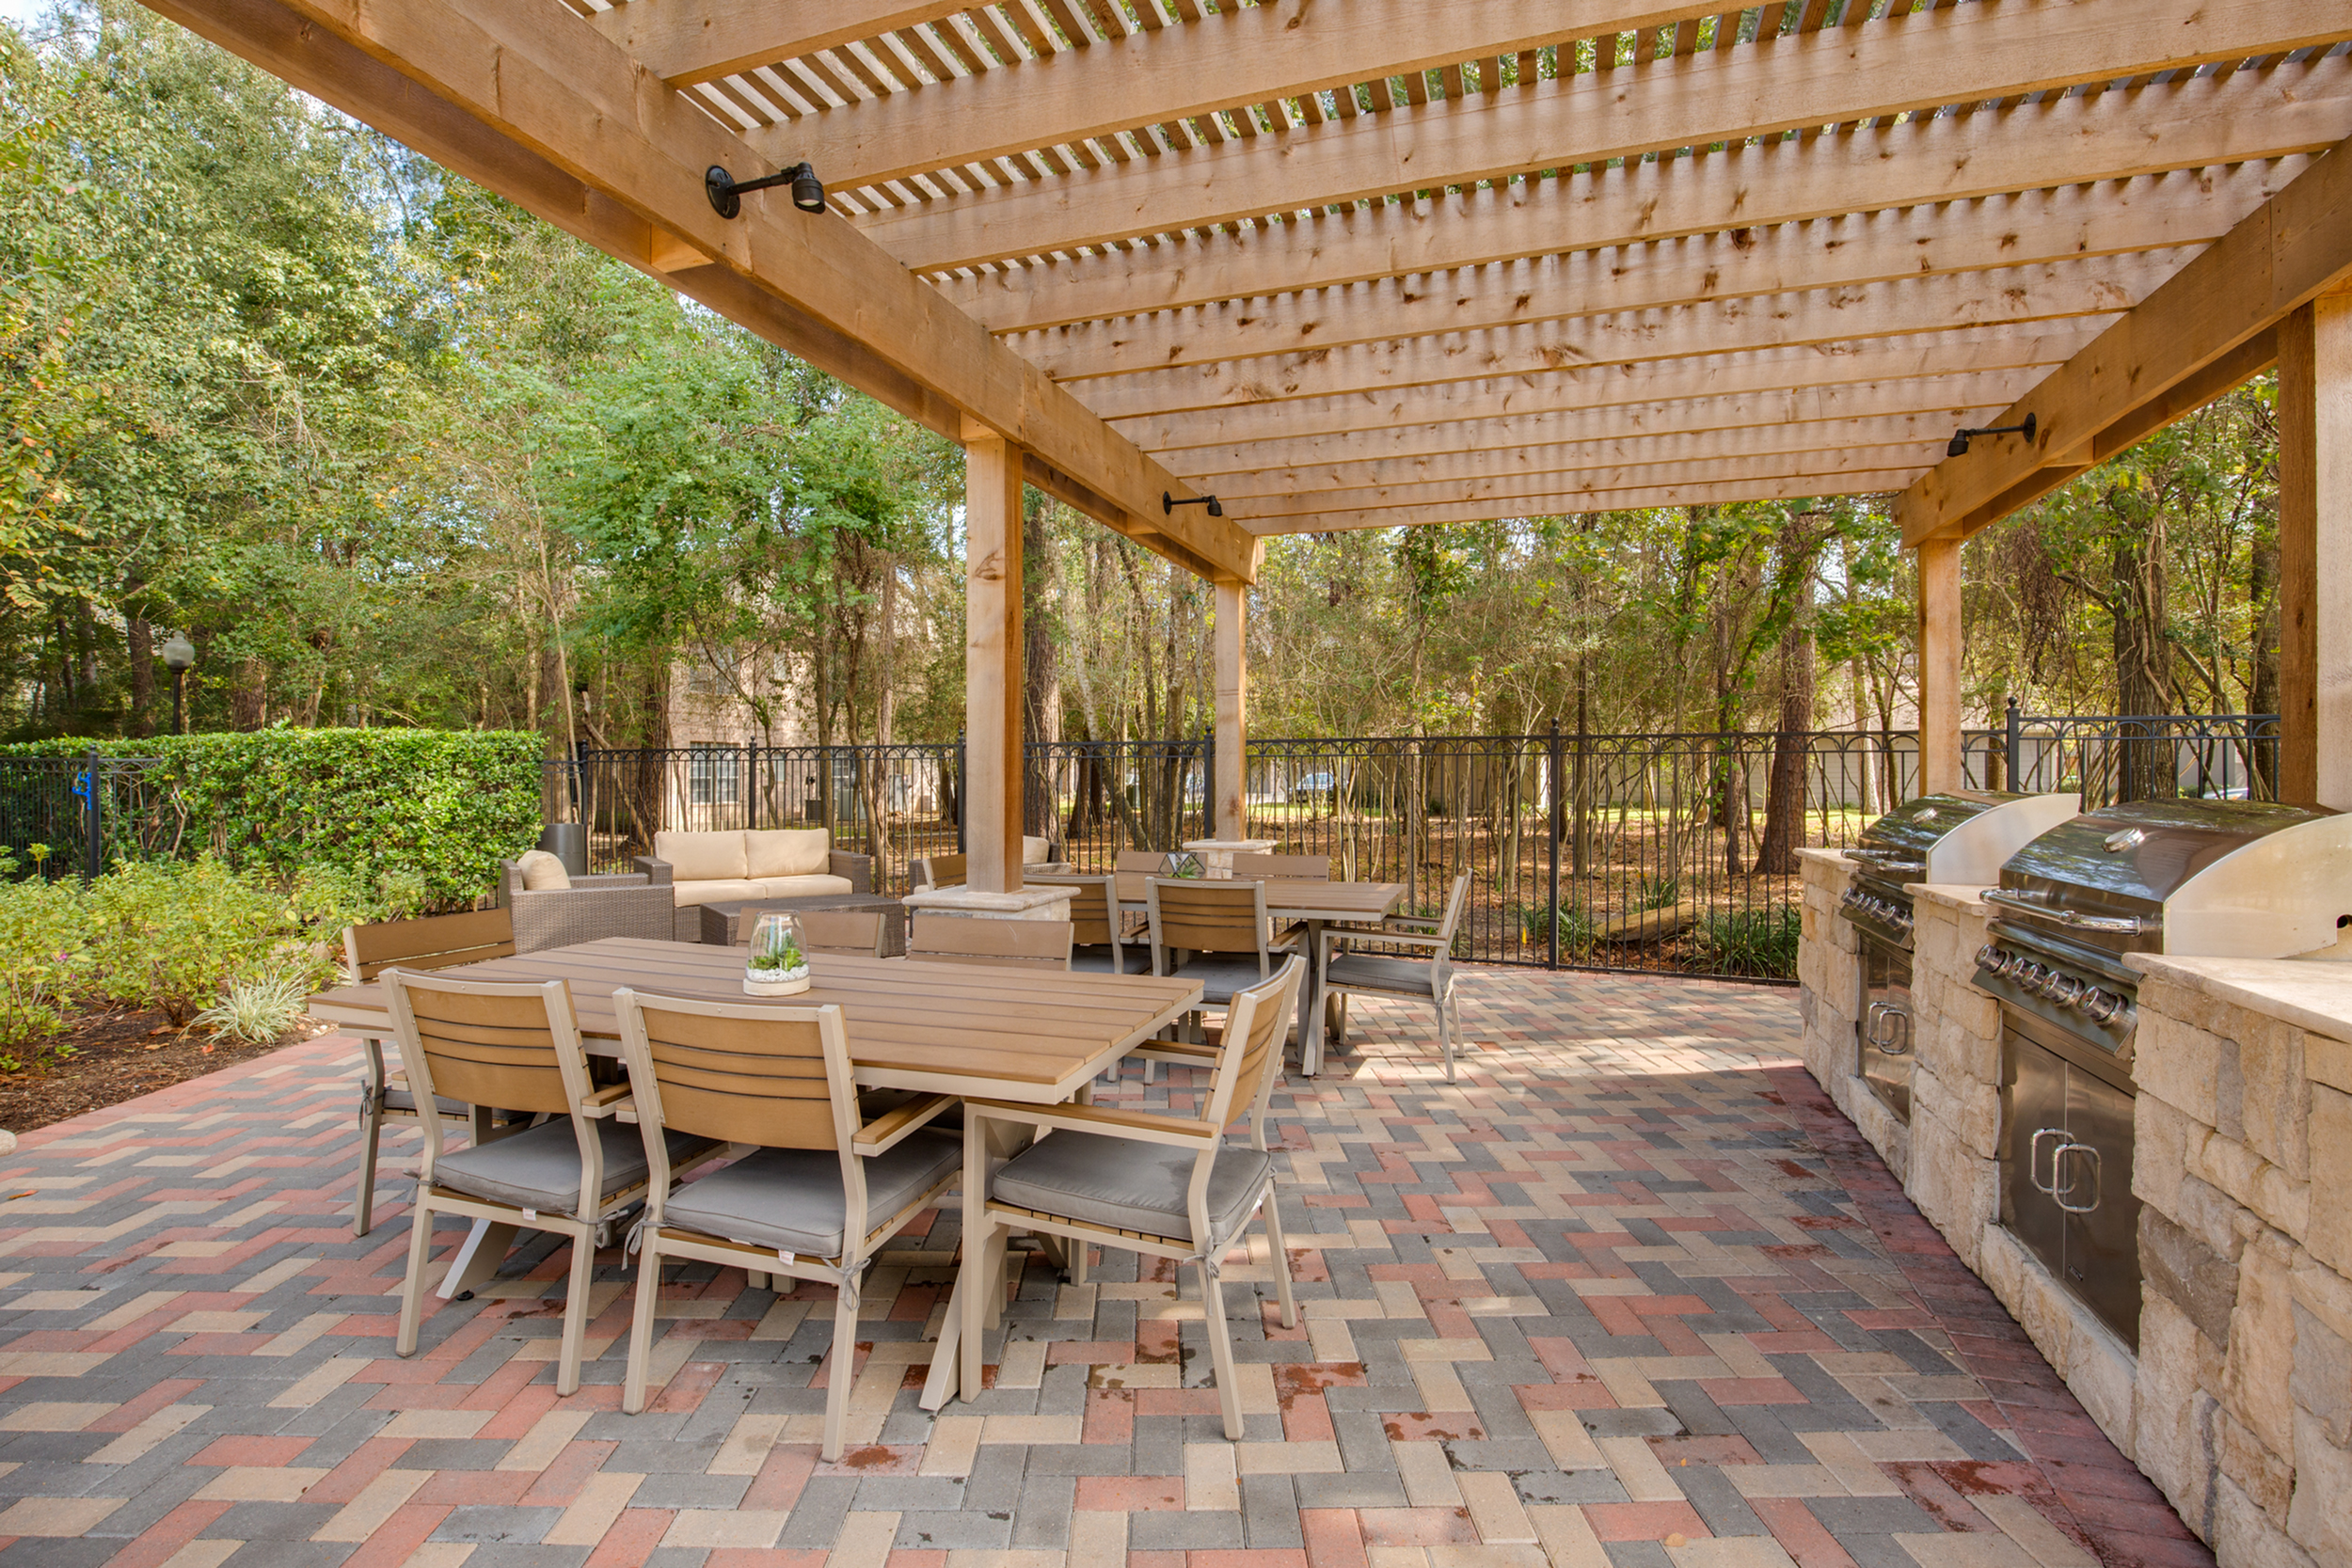 View of Grilling Area with Tables, Chairs, and Landscaping at Raveneaux Apartments